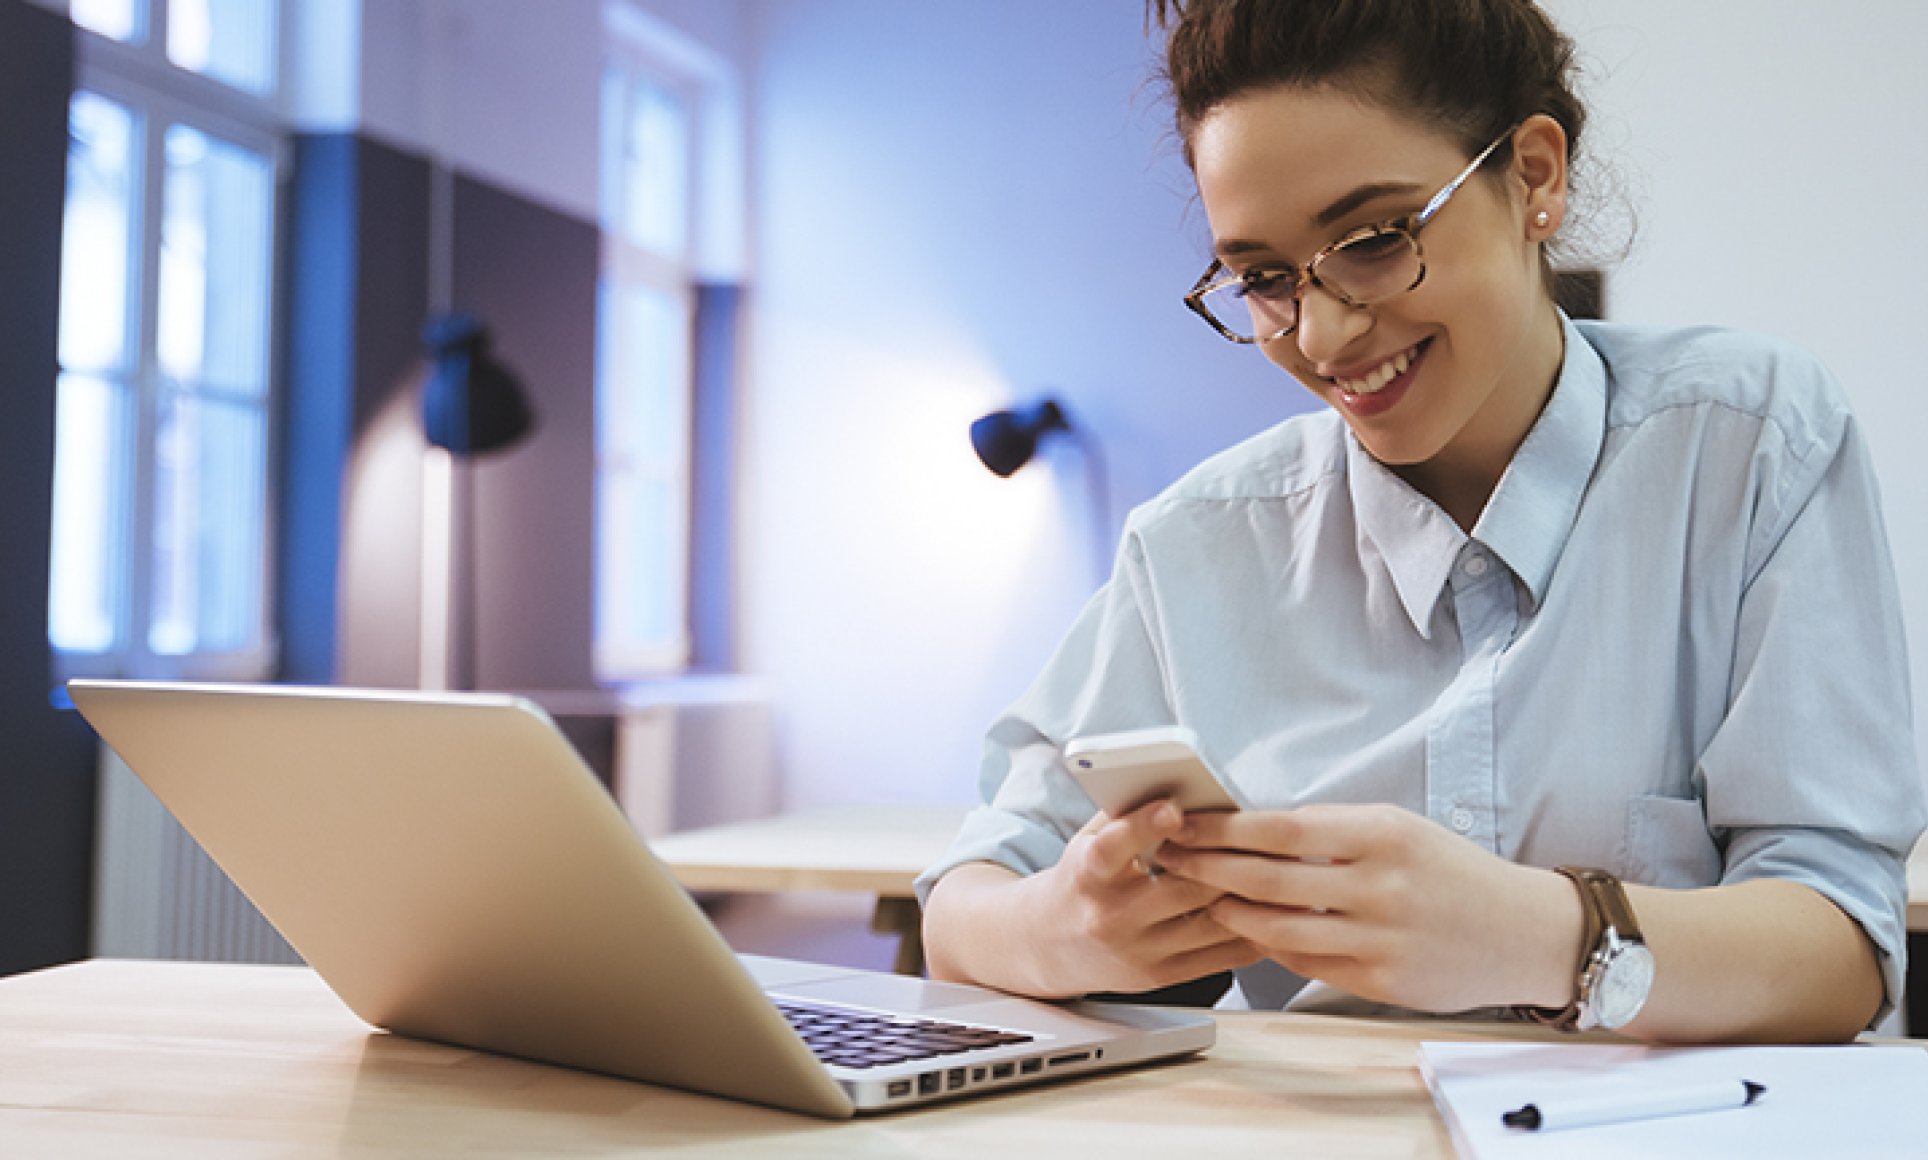 woman smiling, looking at phone in front of laptop